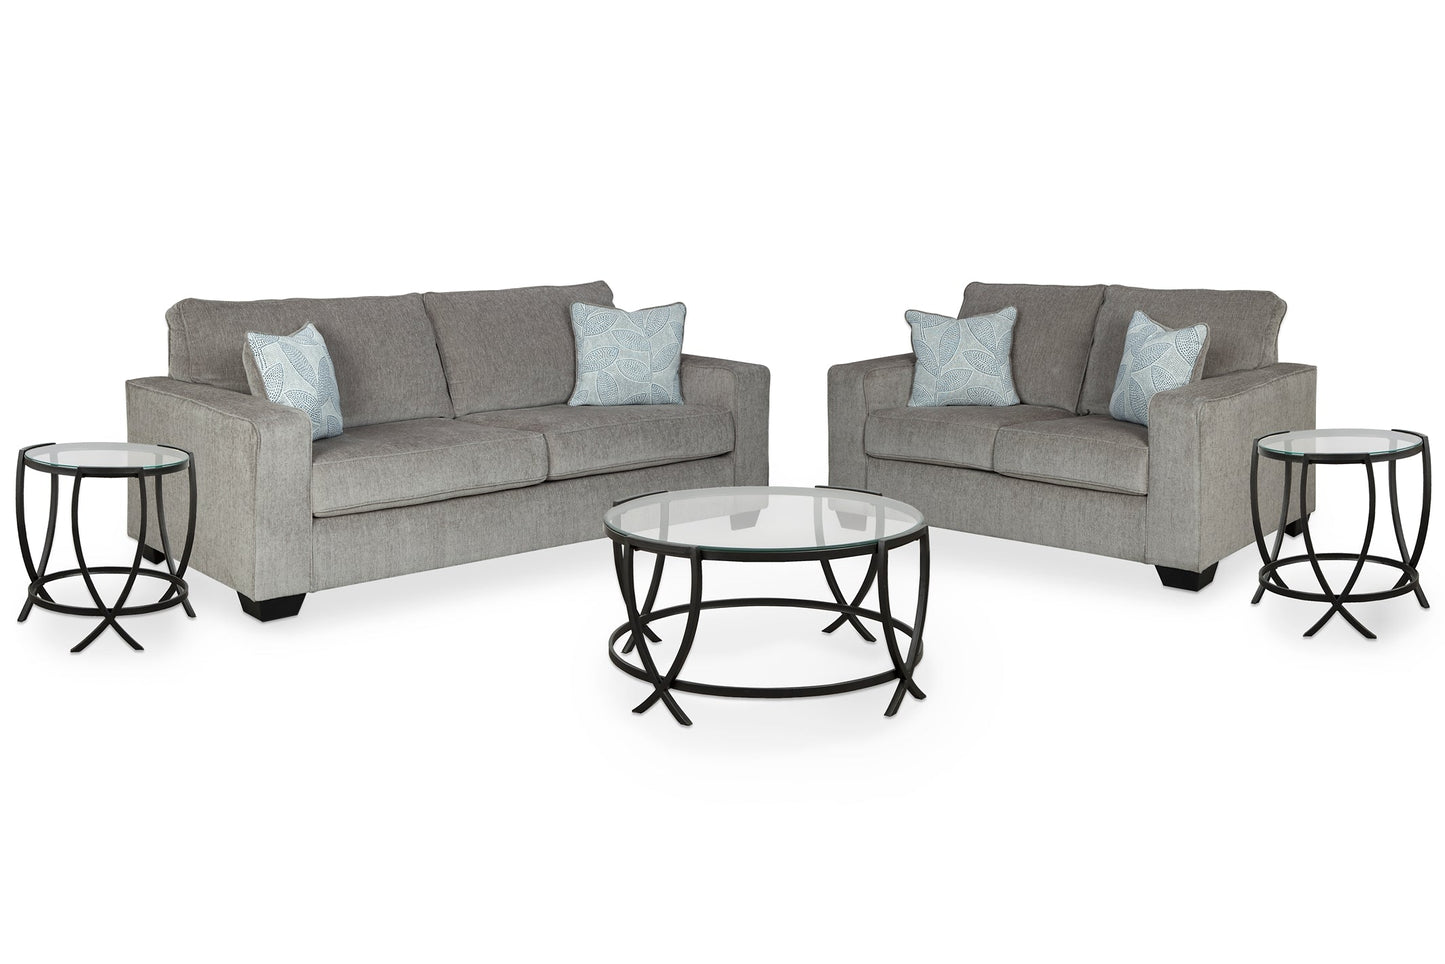 Altari Sofa and Loveseat with Coffee Table and 2 End Tables at Walker Mattress and Furniture